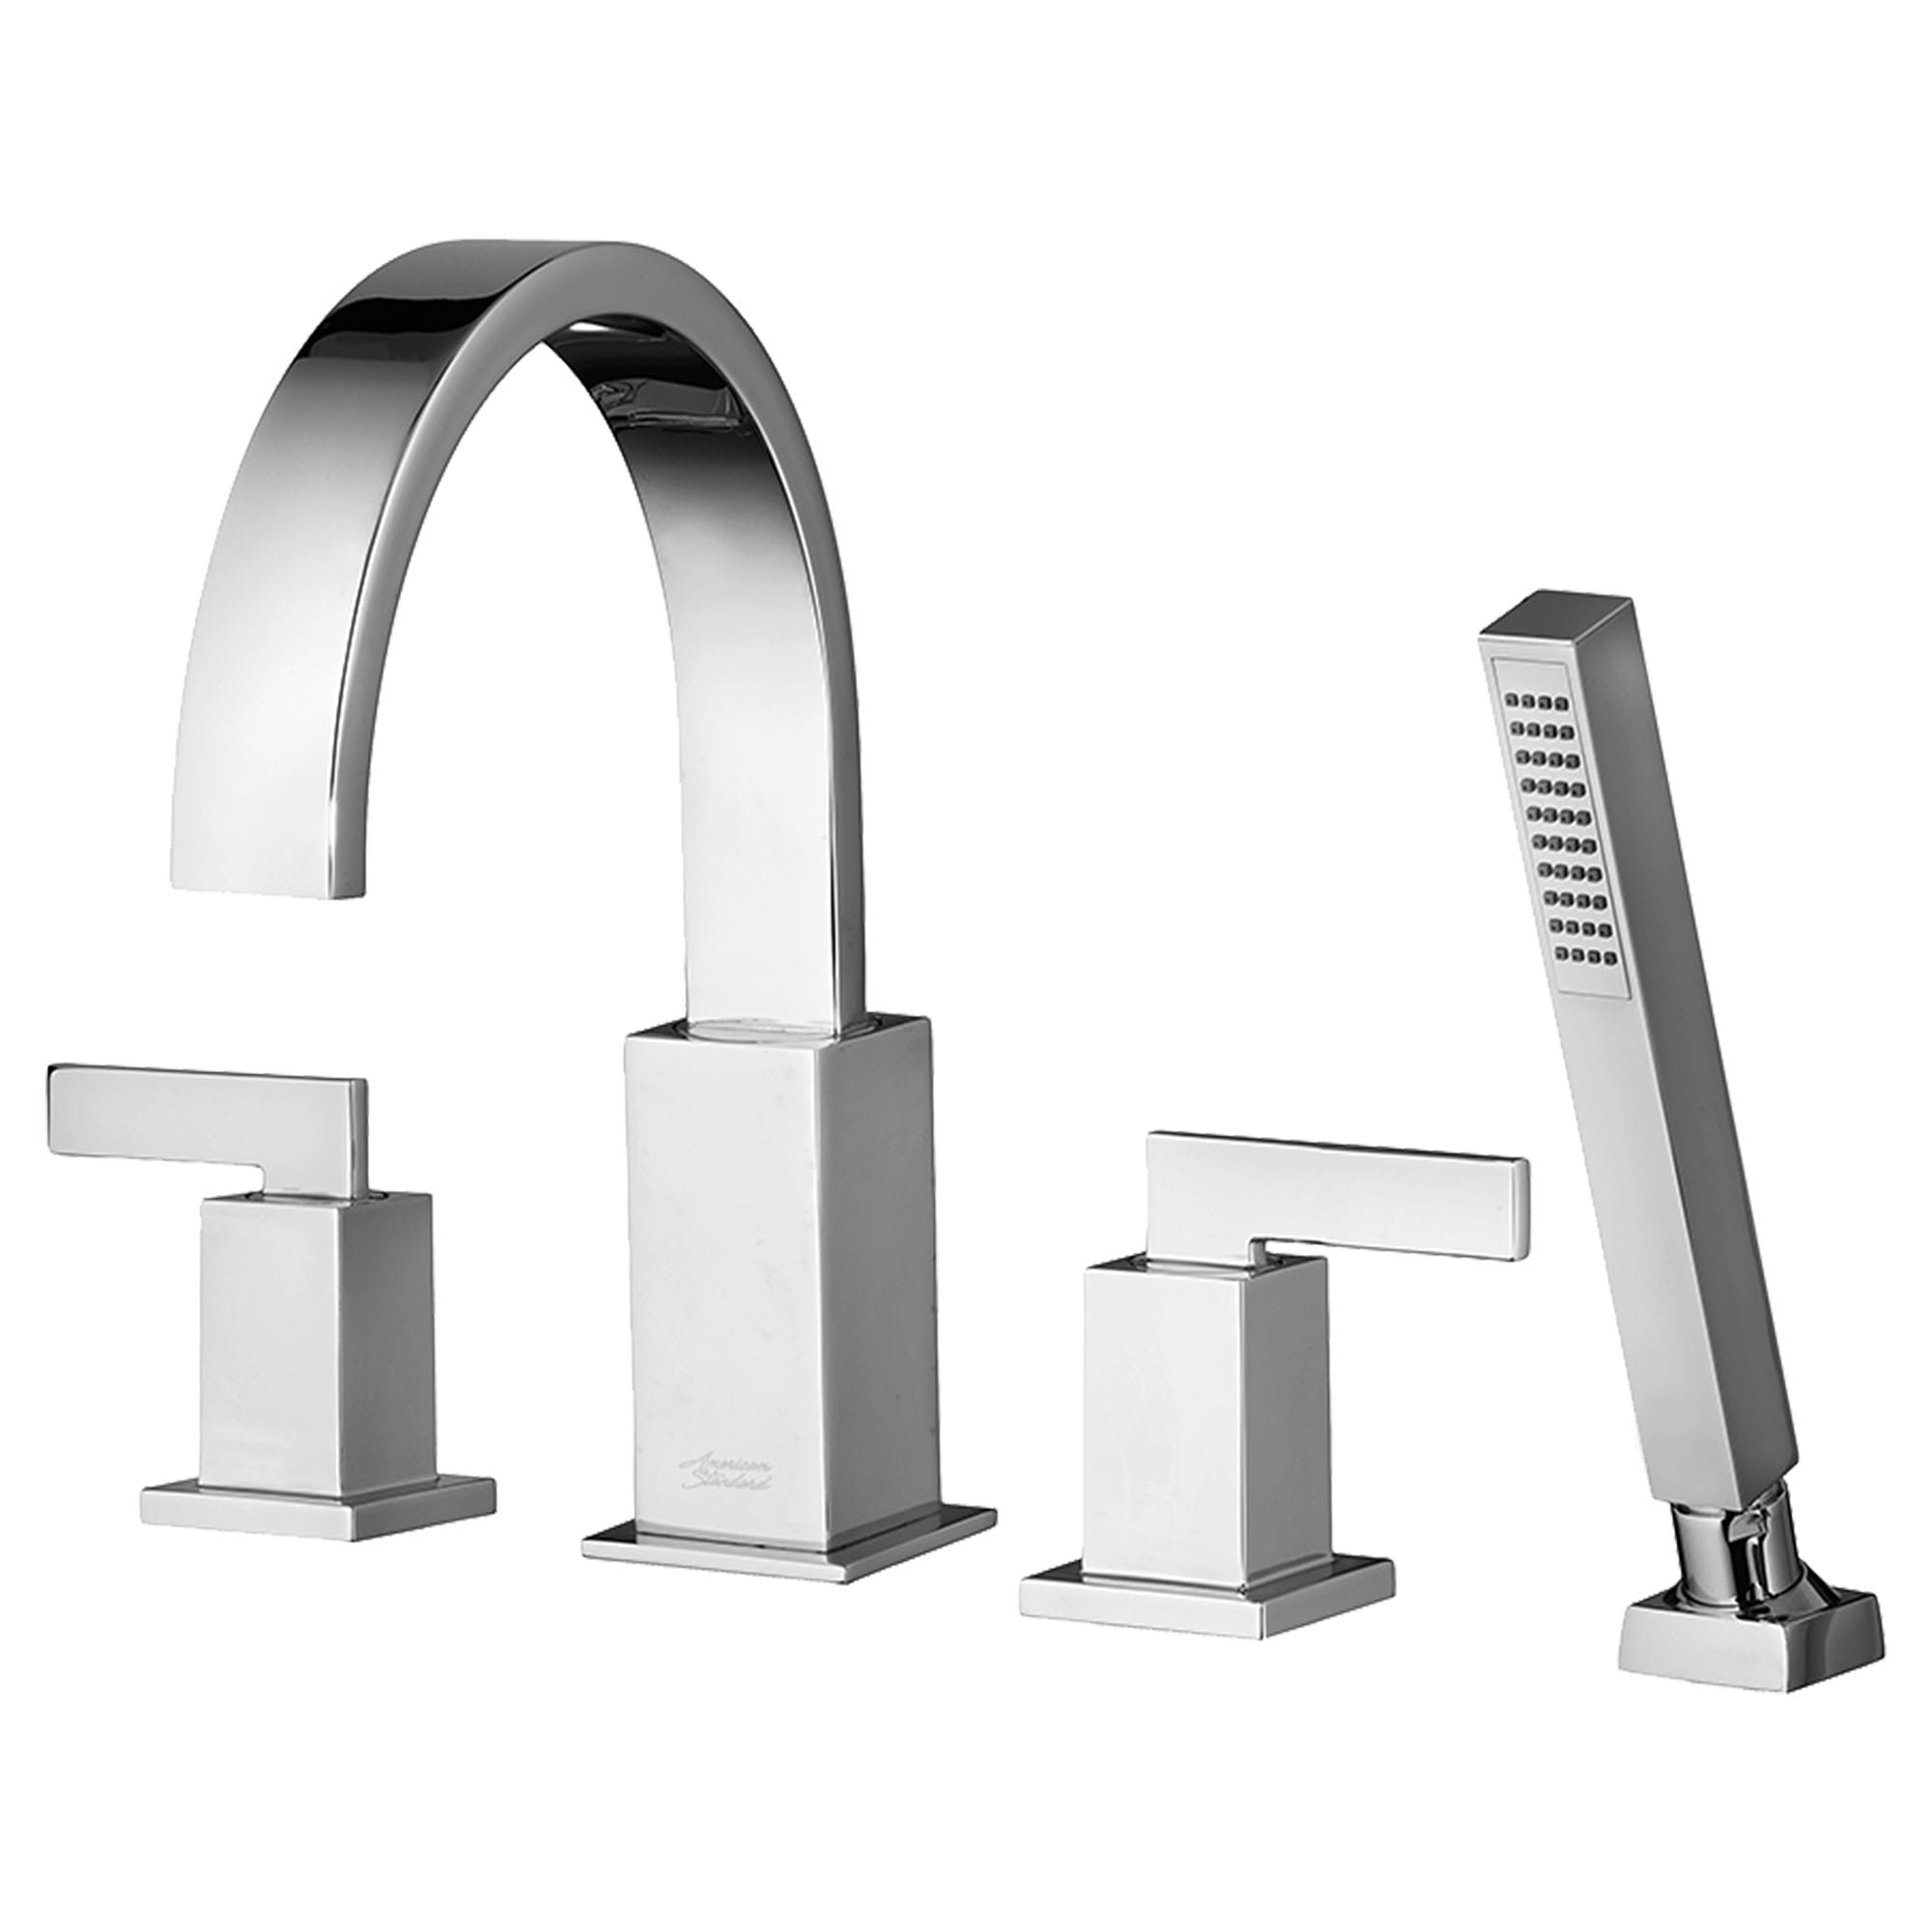 Time Square Bathtub Faucet With Lever Handles and Personal Shower for Flash Rough In Valve CHROME